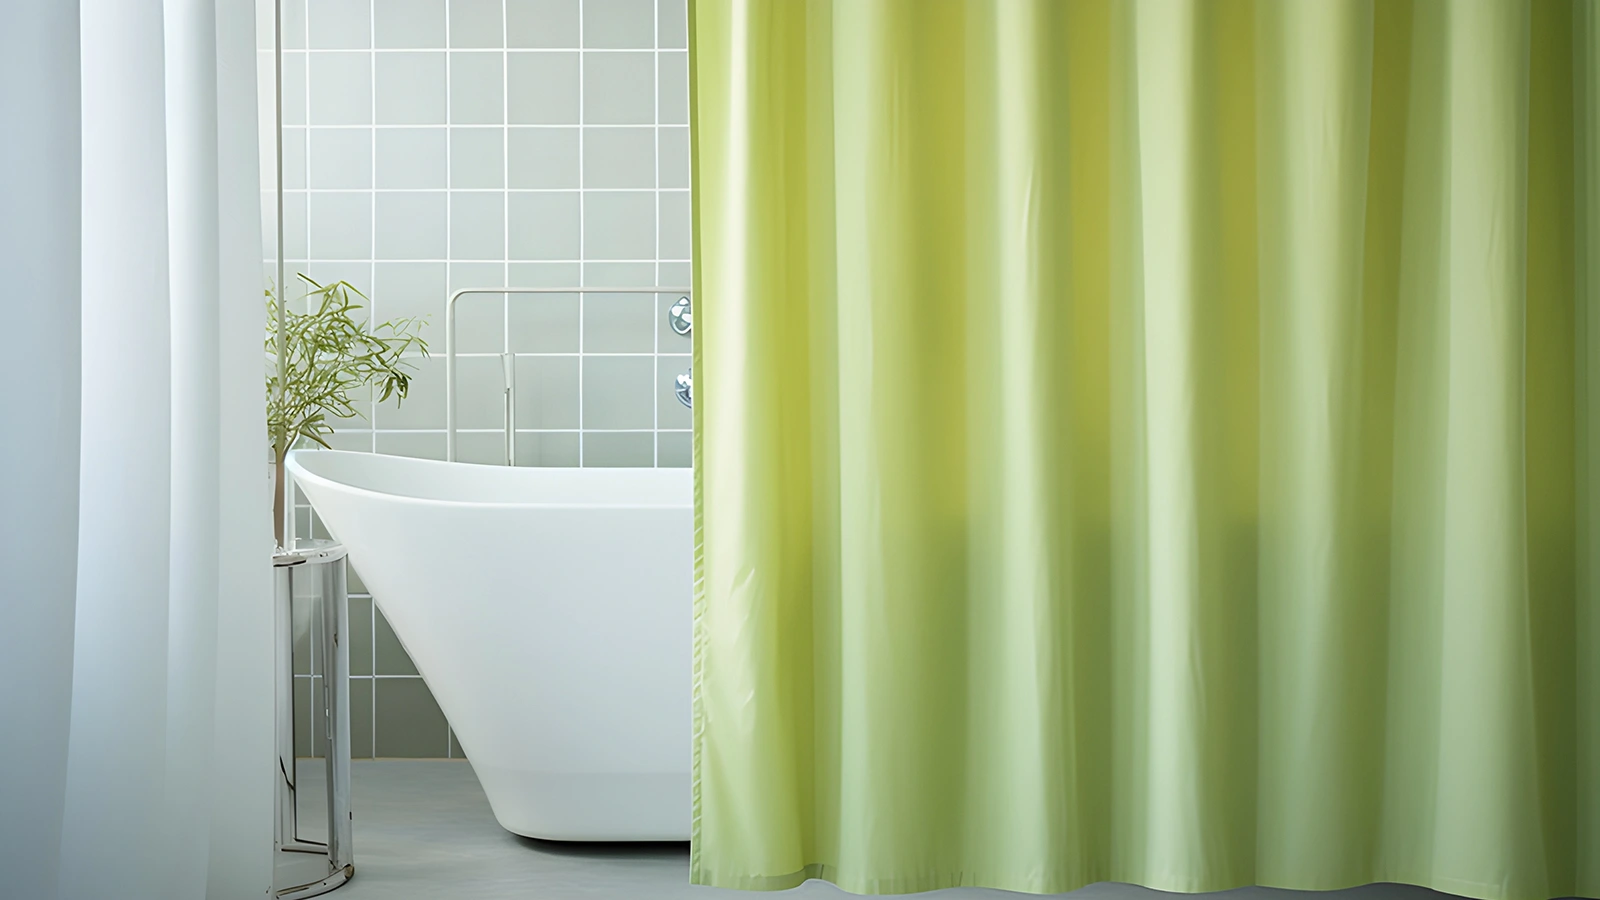 A bathroom with a green shower curtain, potentially dangerous if mold is present on the curtain.